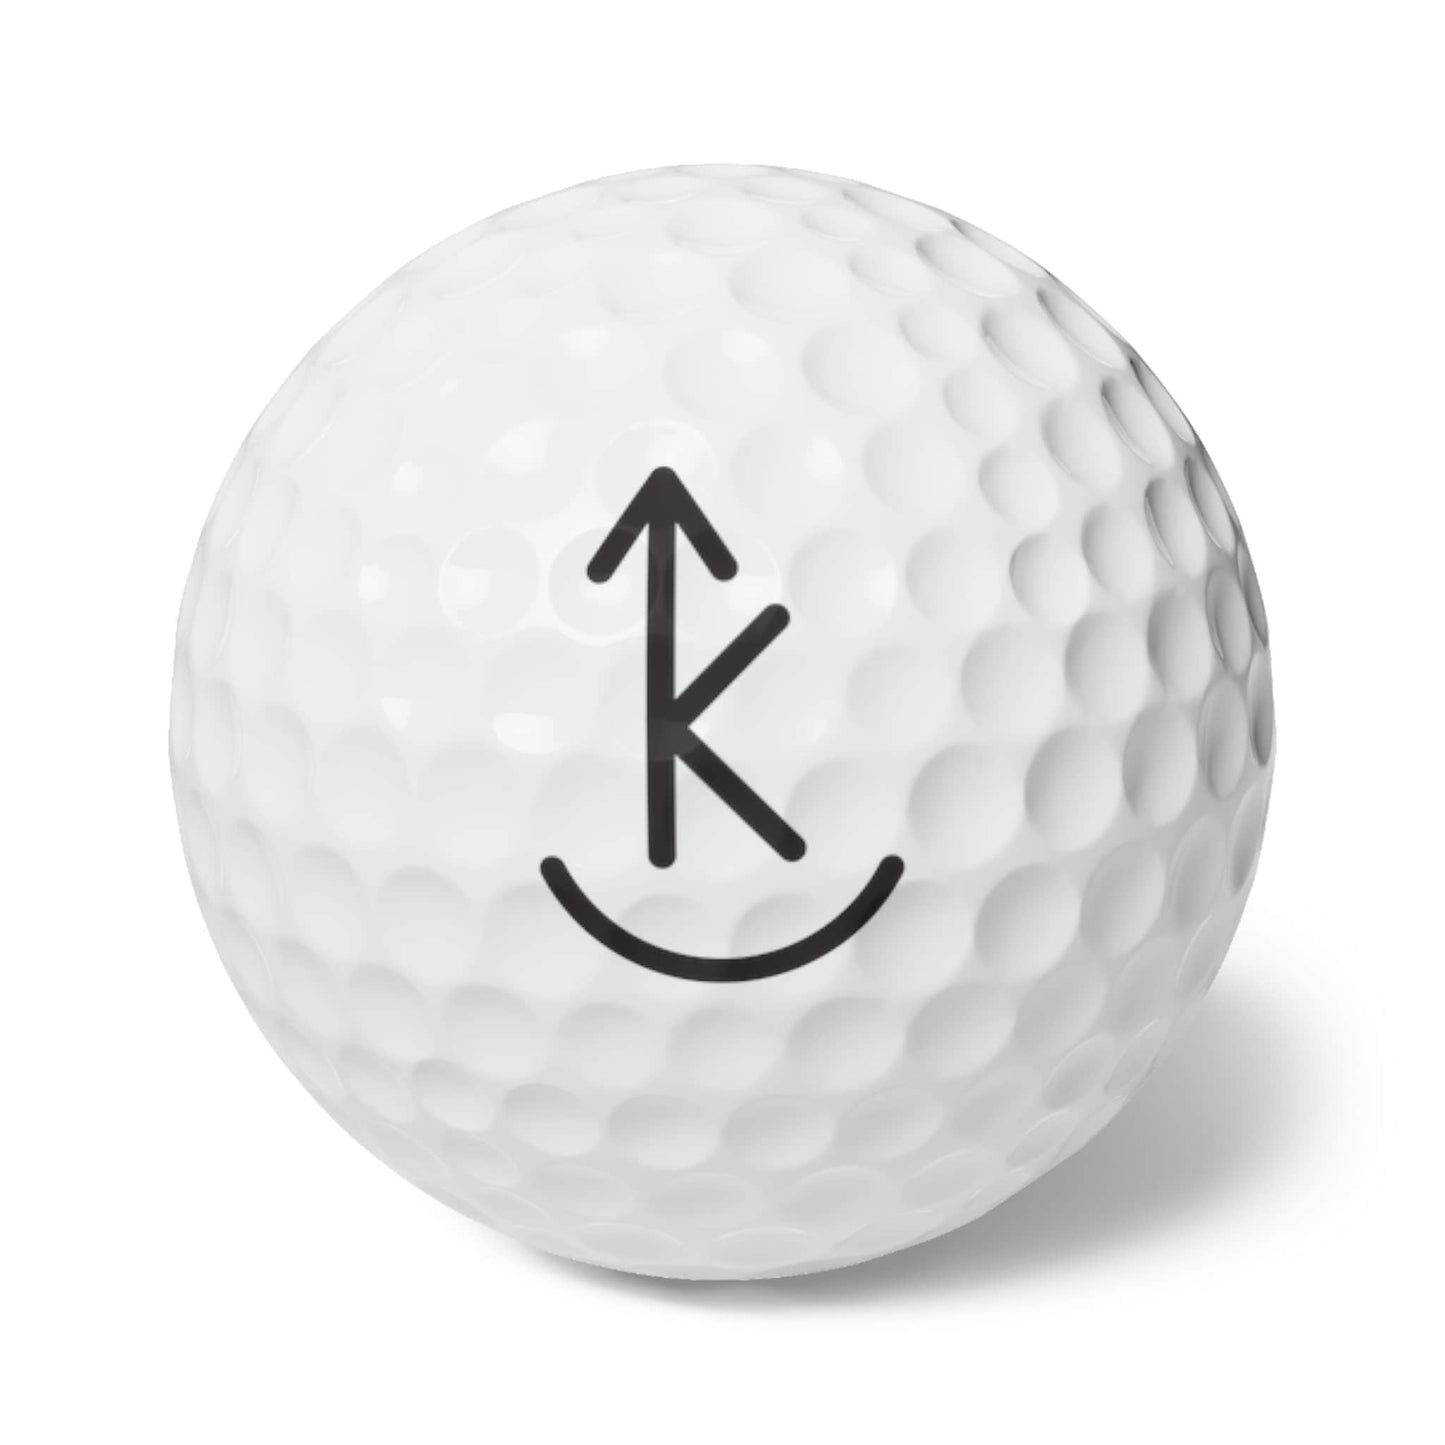 CUSTOM CATTLE BRAND Golf Balls, Personalized Golf Balls with your Family Cattle or Horse Brand Custom Golf Balls for Cowboy Scramble